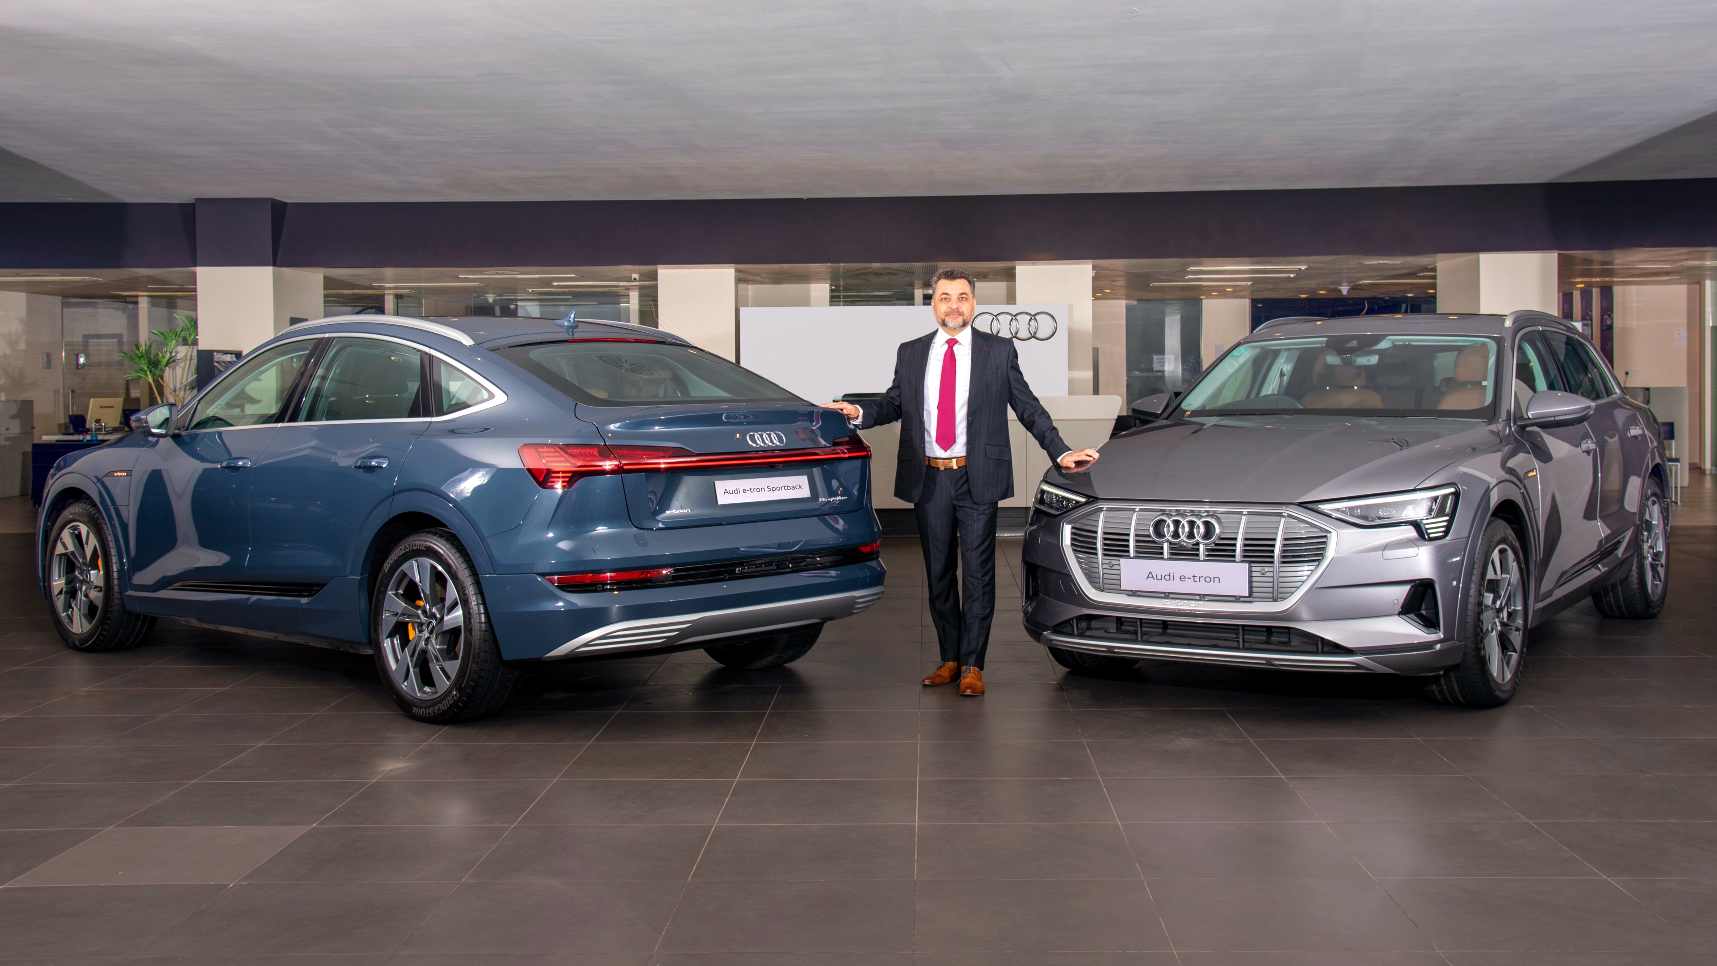 You are currently viewing Audi e-tron and e-tron Sportback launched in India, priced lower than Mercedes-Benz EQC- Technology News, FP